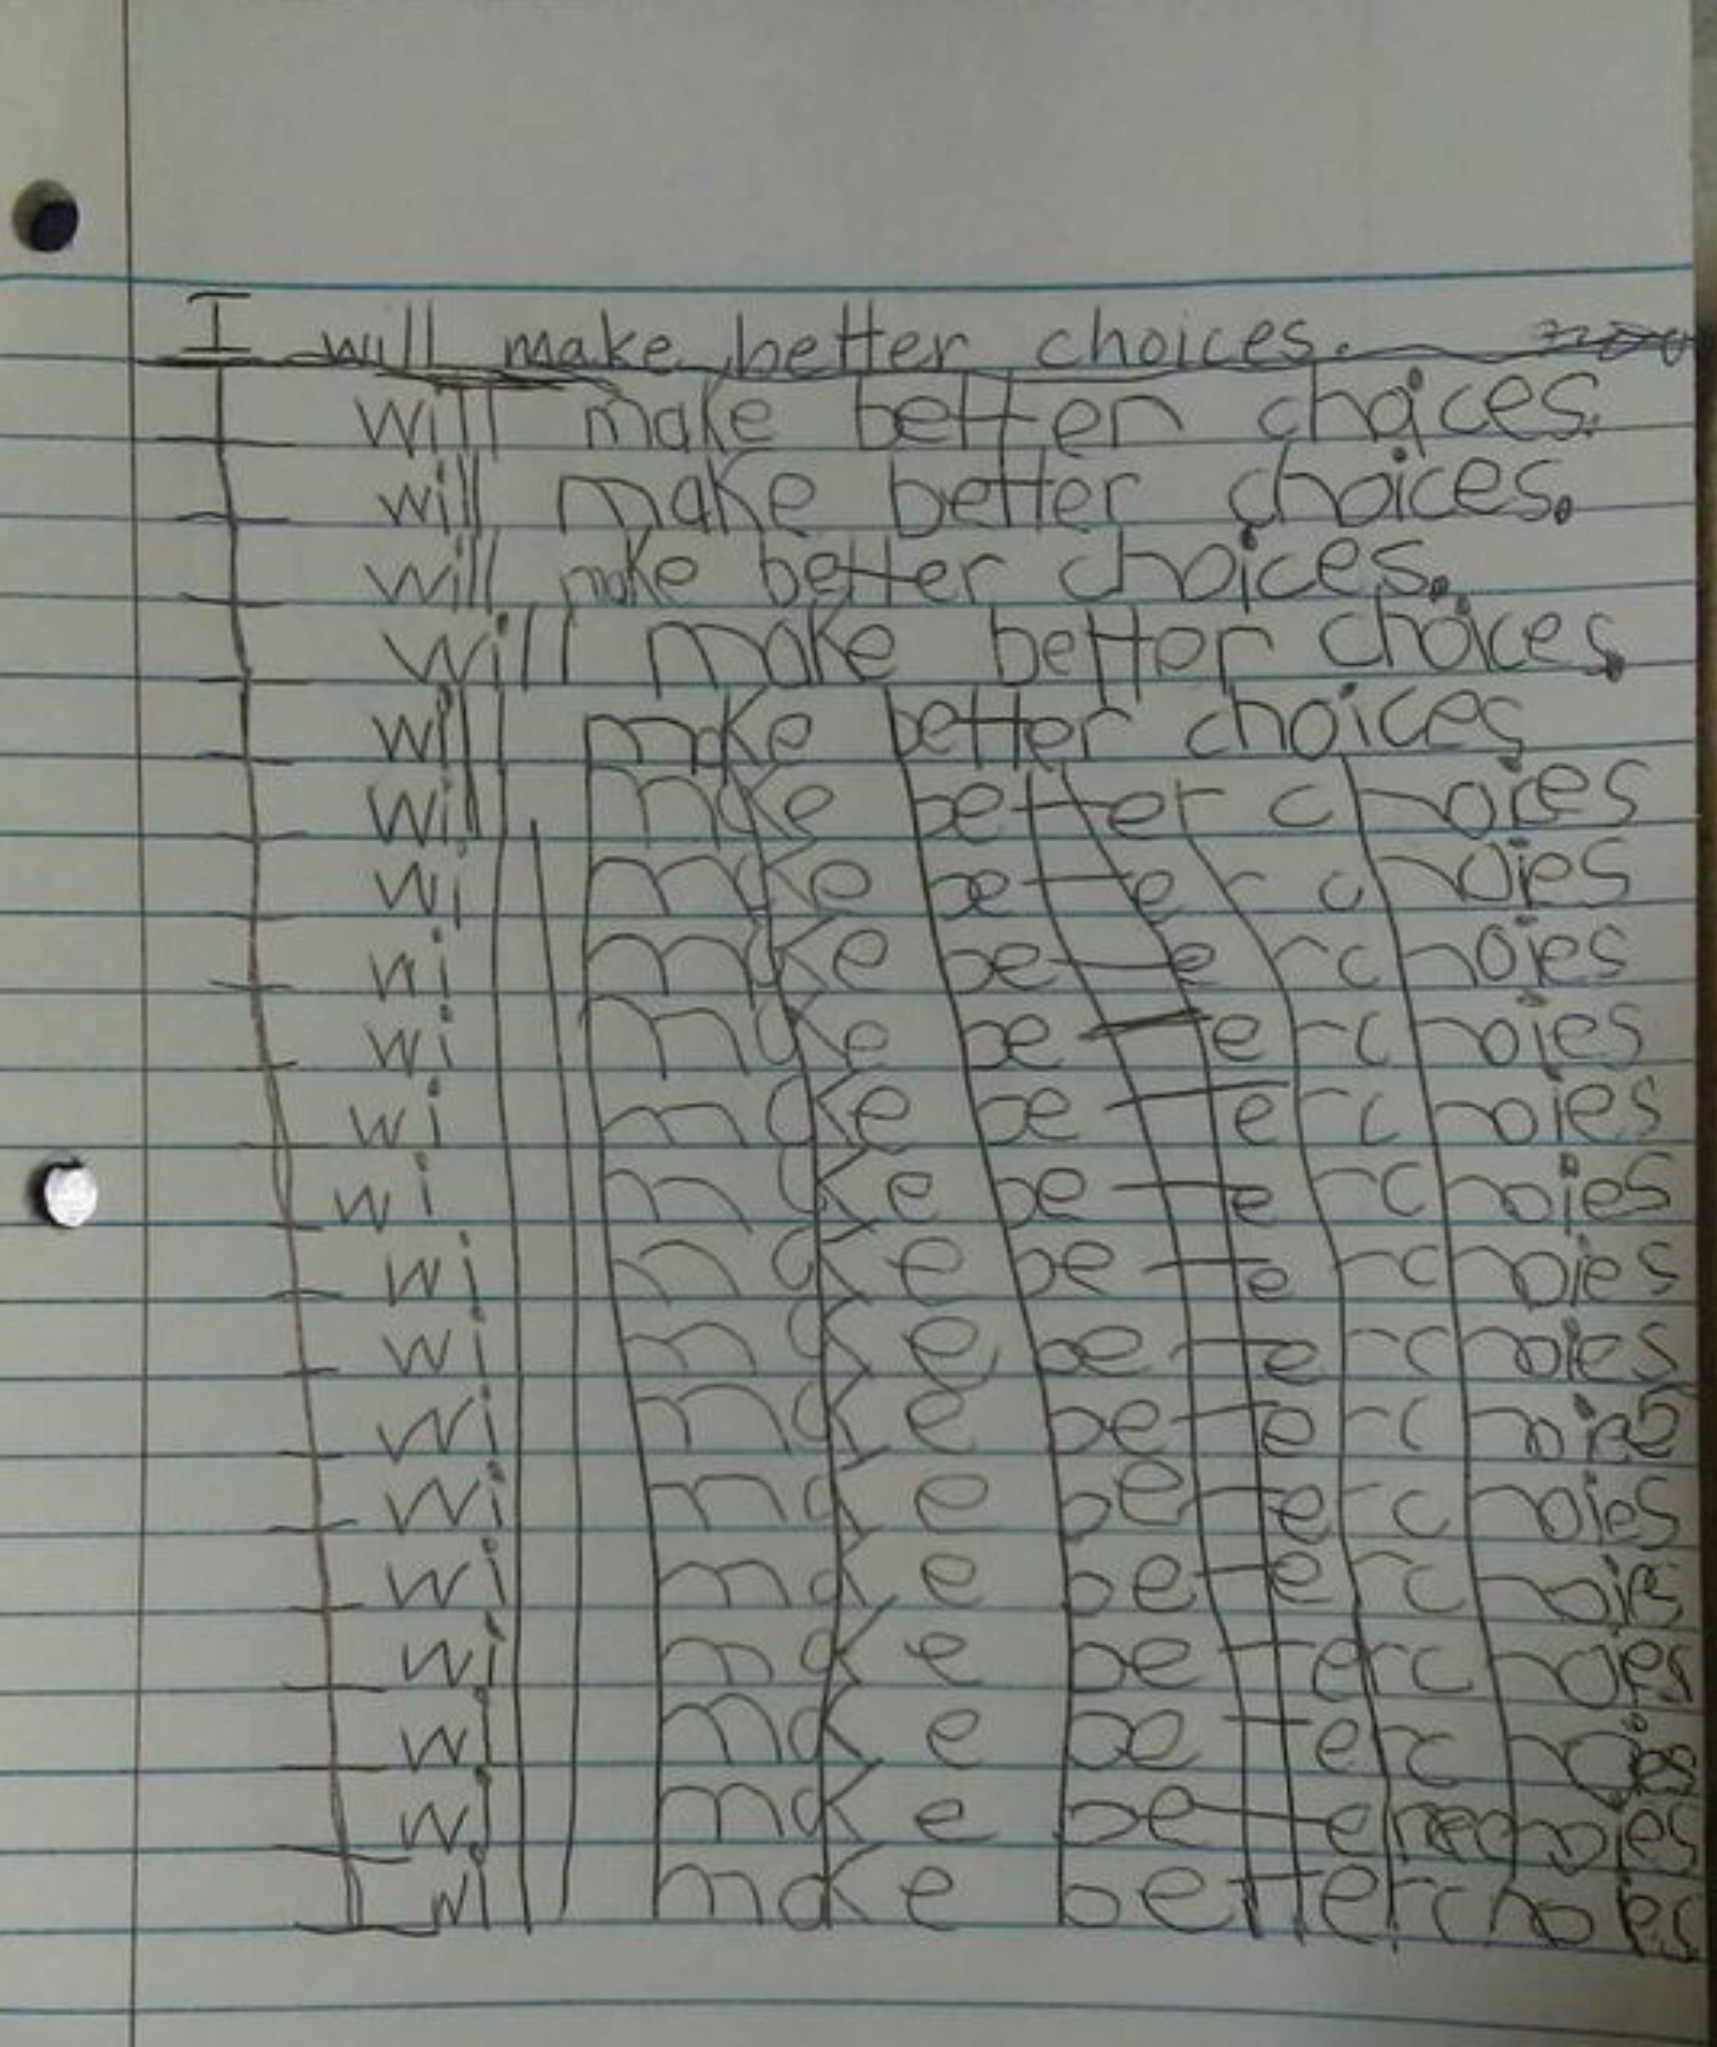 kid is going places meme - L make better choices and W male felten choces wil make better choices will ruke better choices, ake better chores will mike better choices W Thk Petercores Winkebet ka hores noies Wil On 57070707 0 0 ole w W choies choles 100 0